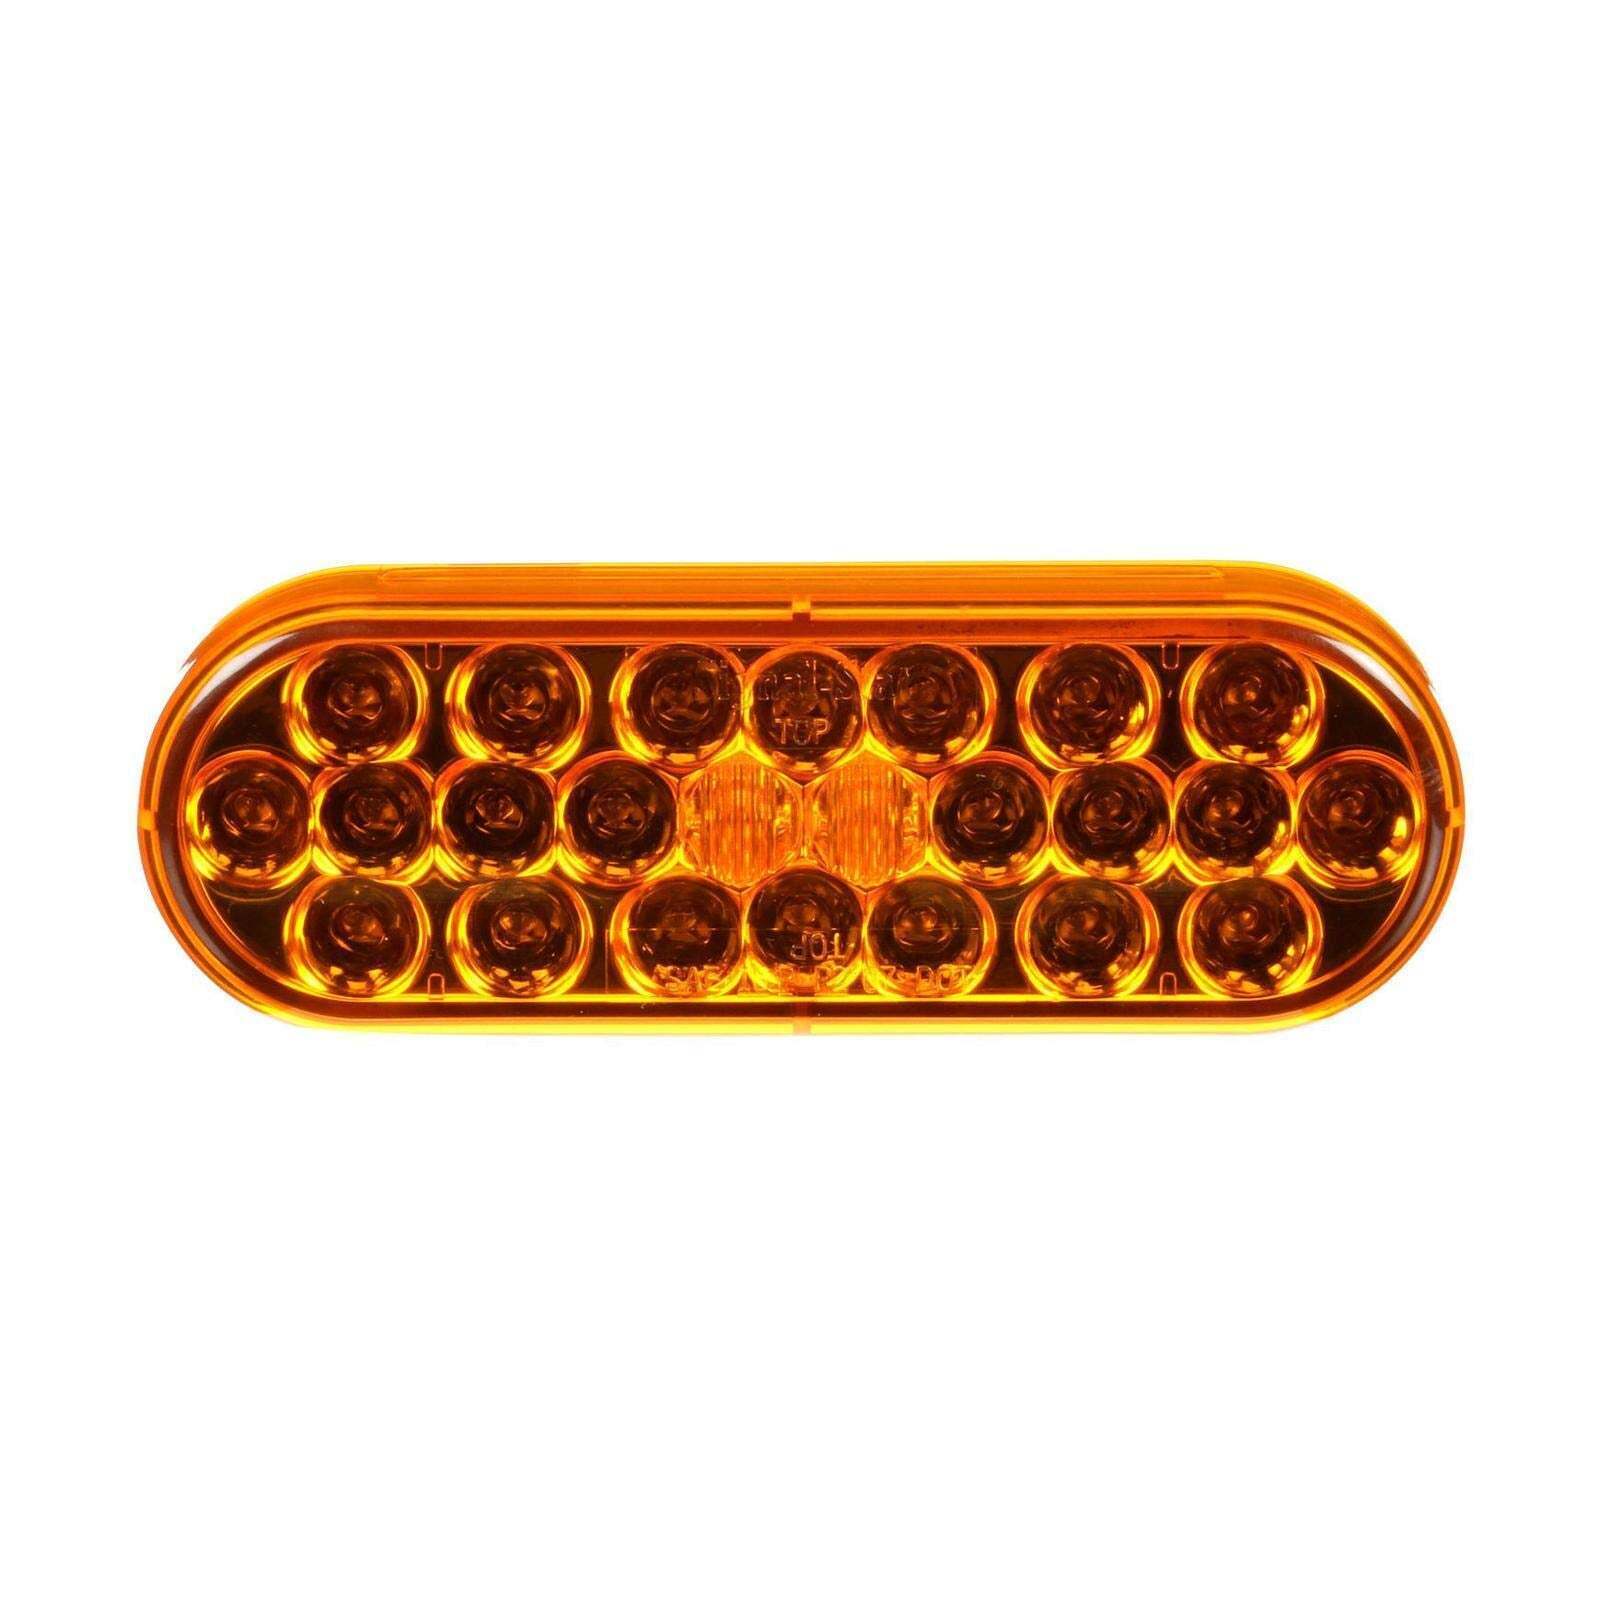 Truck-Lite (6050A) LED Front/Park/Turn Lamp